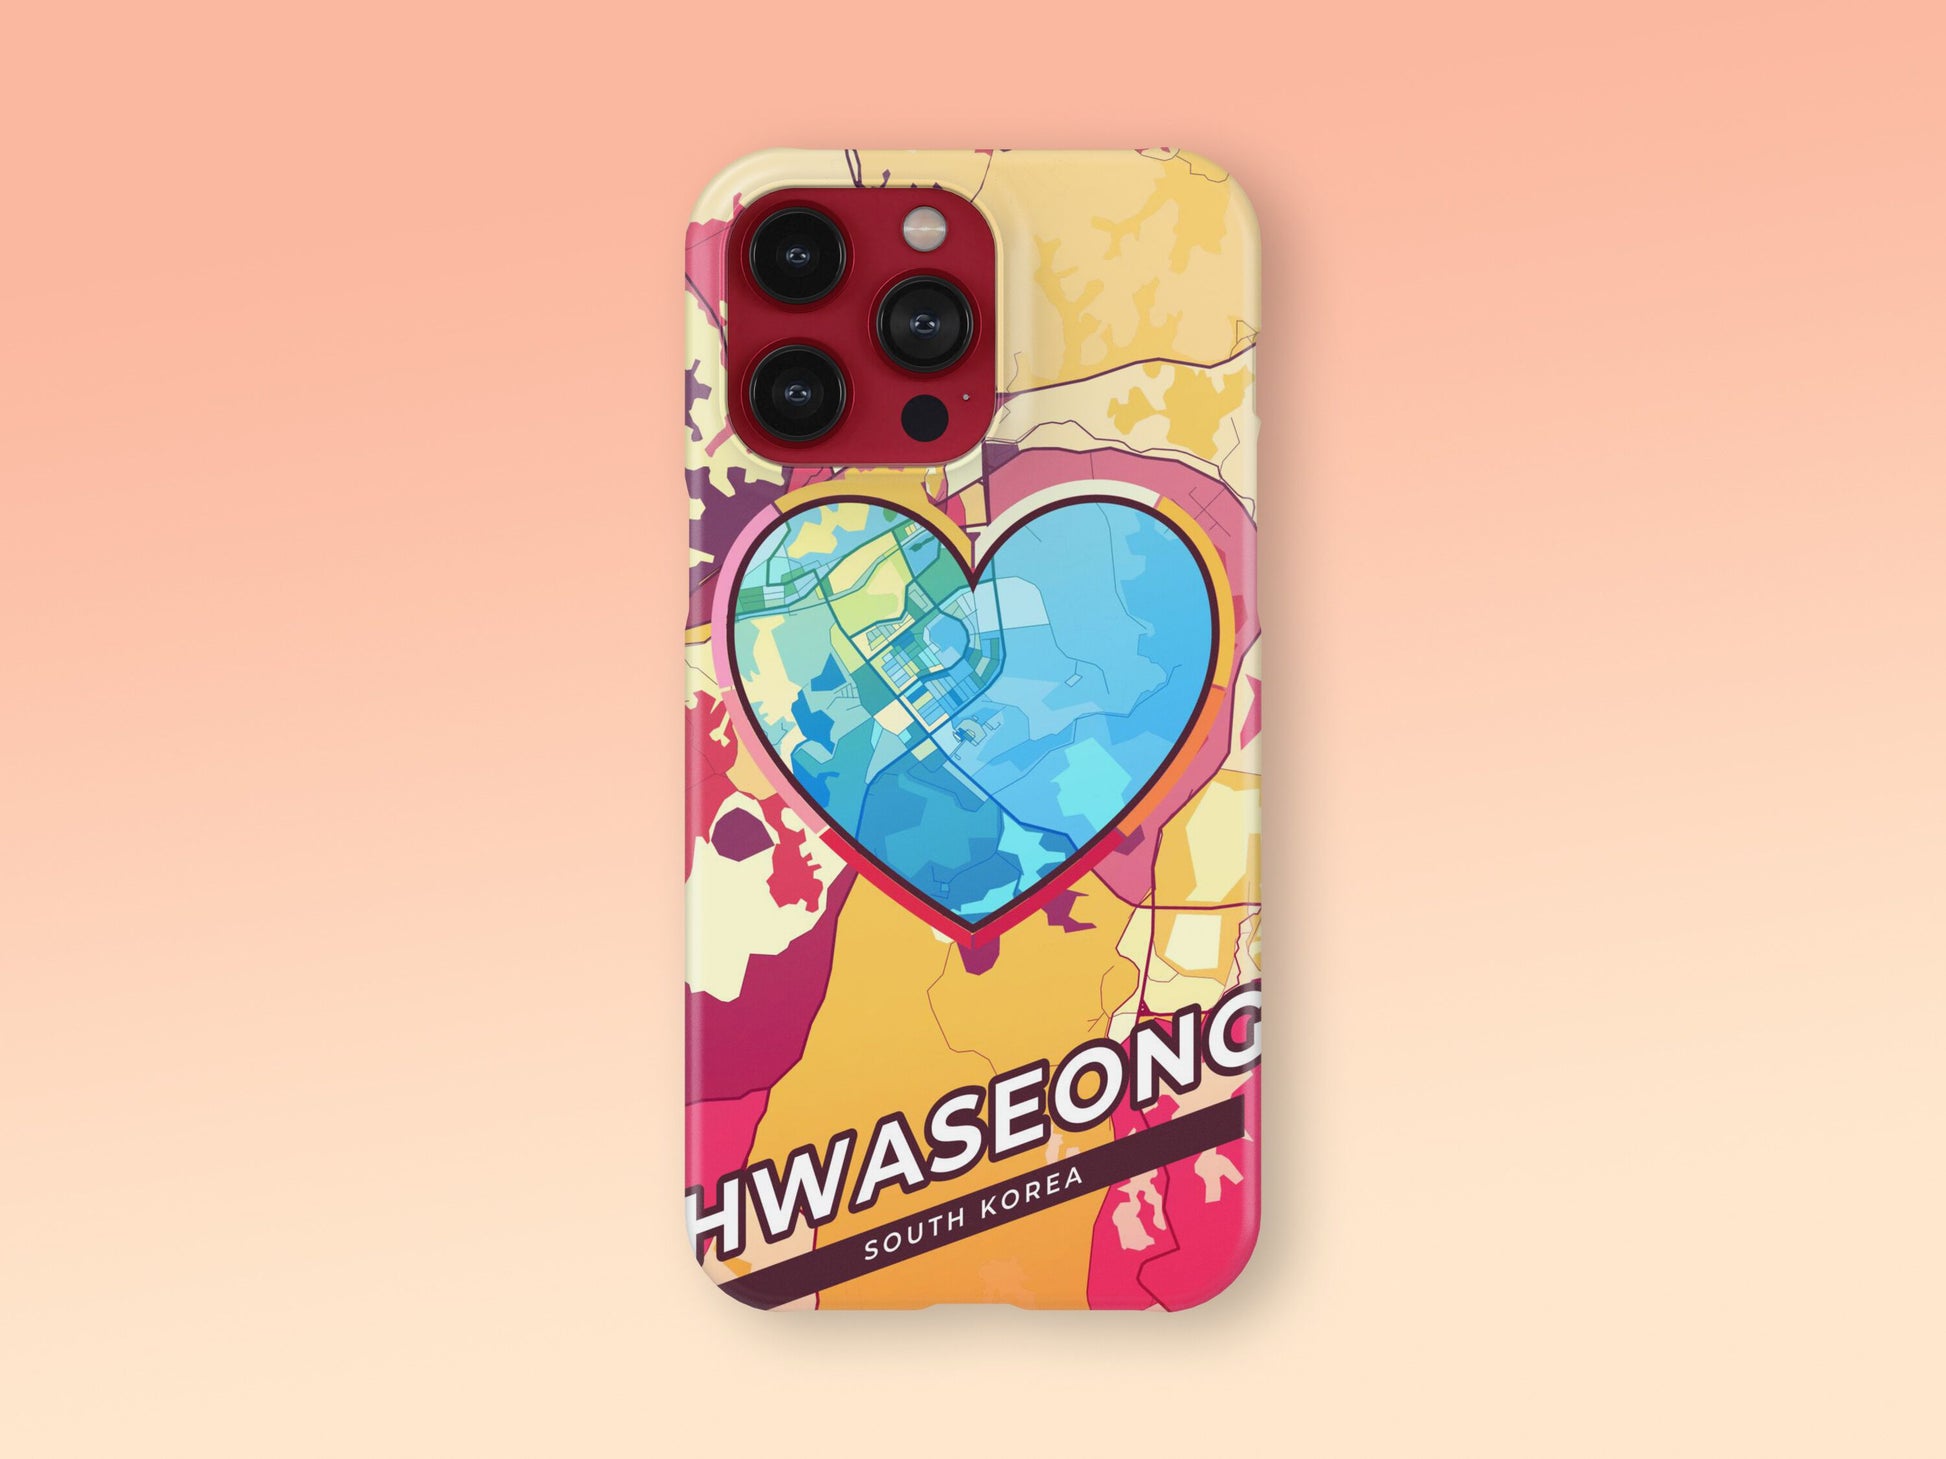 Hwaseong South Korea slim phone case with colorful icon. Birthday, wedding or housewarming gift. Couple match cases. 2